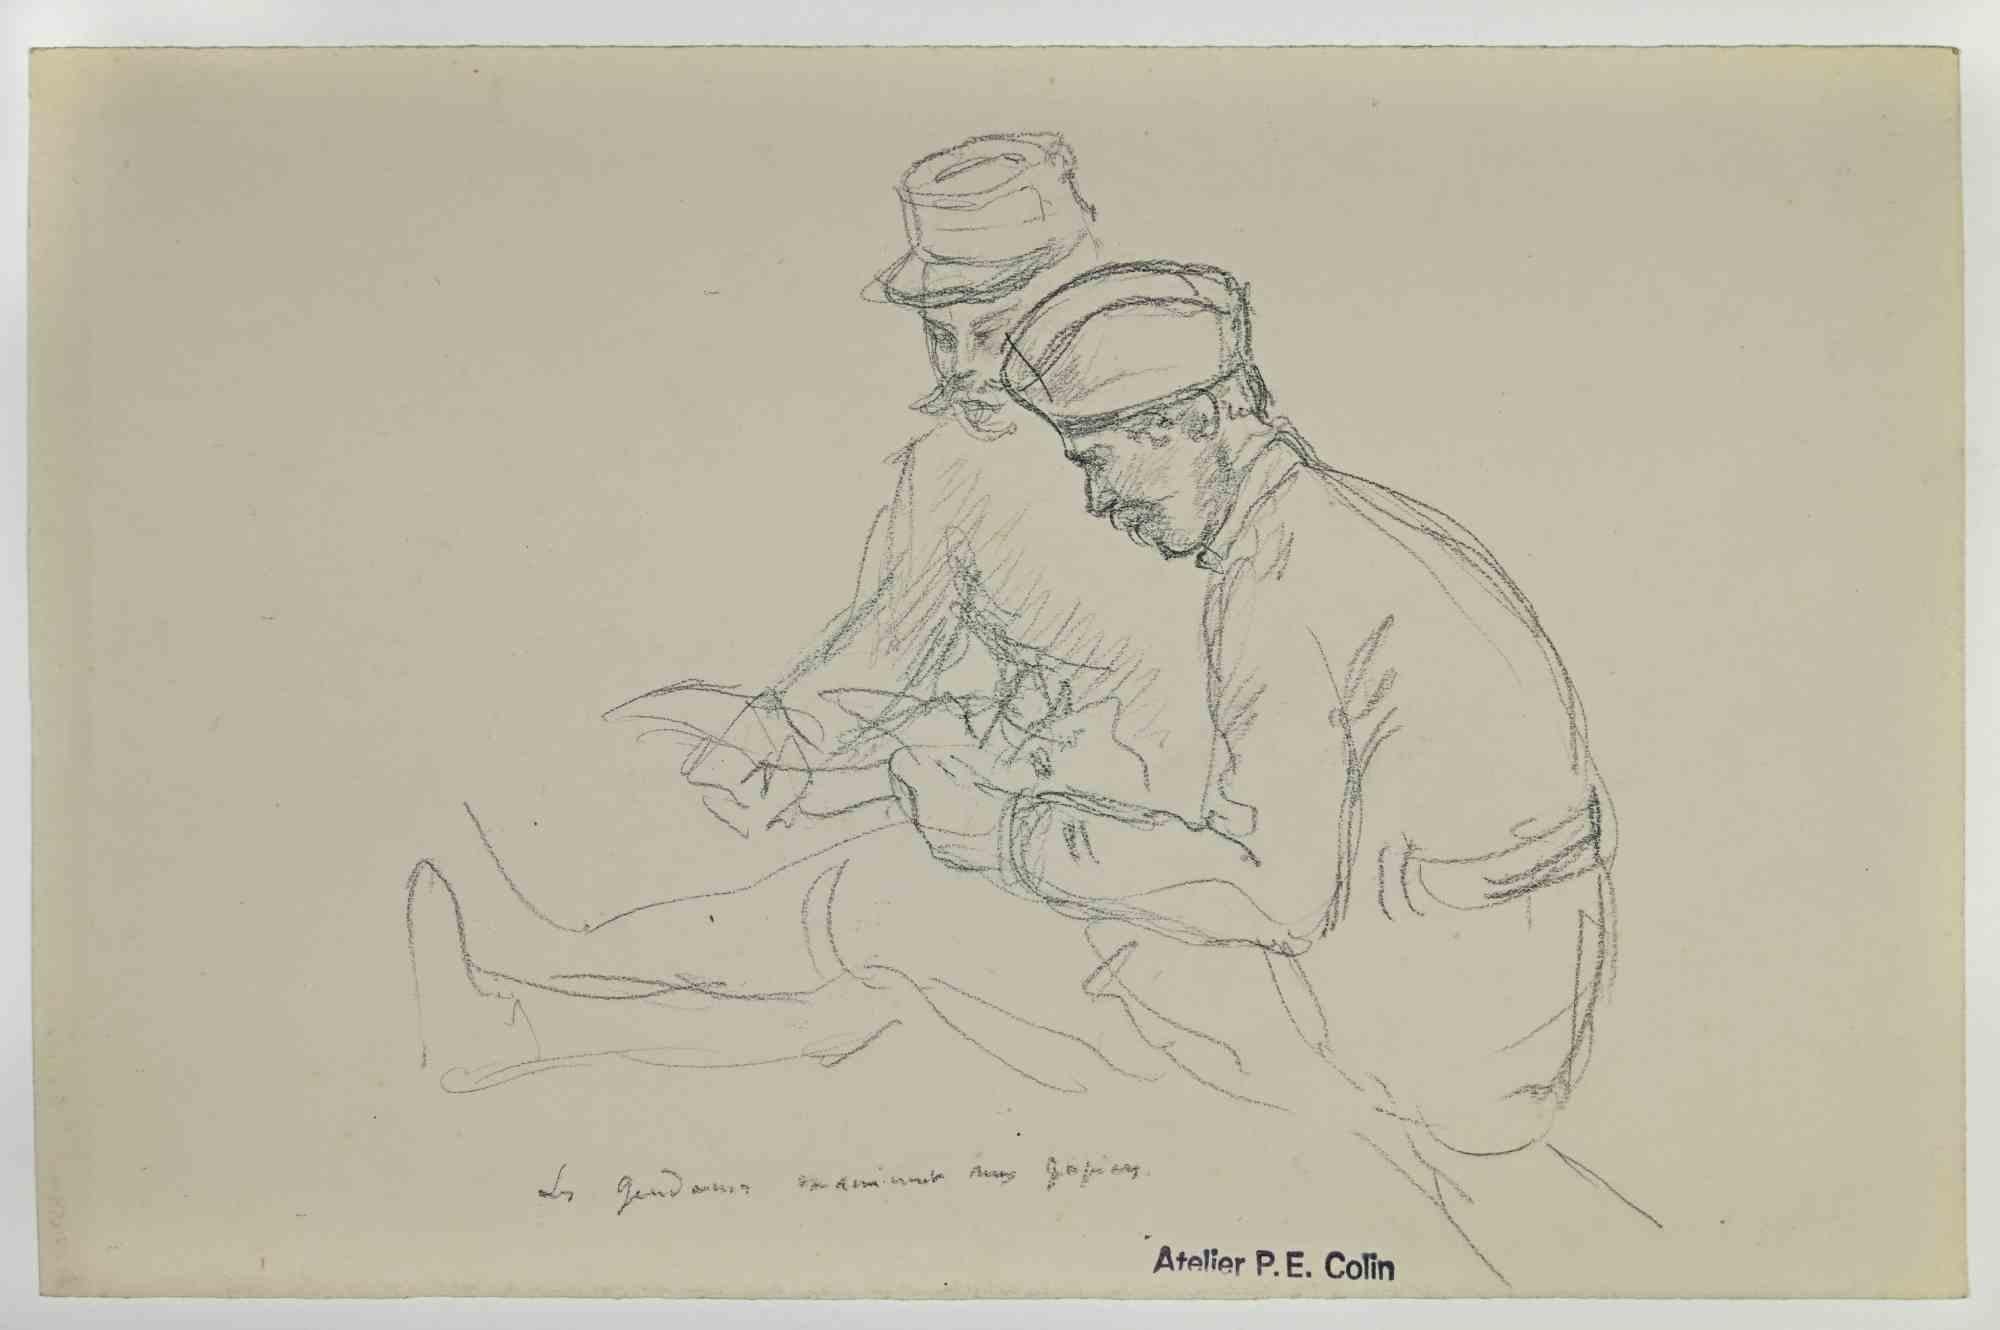 Planning in the War is a drawing realized by  Paul Emile Colin in the Early 20th Century.

Carbon Pencil on ivory-colored paper

Stamped on the lower.

Good conditions with slight foxing.

The artwork is realized through deft expressive strokes.